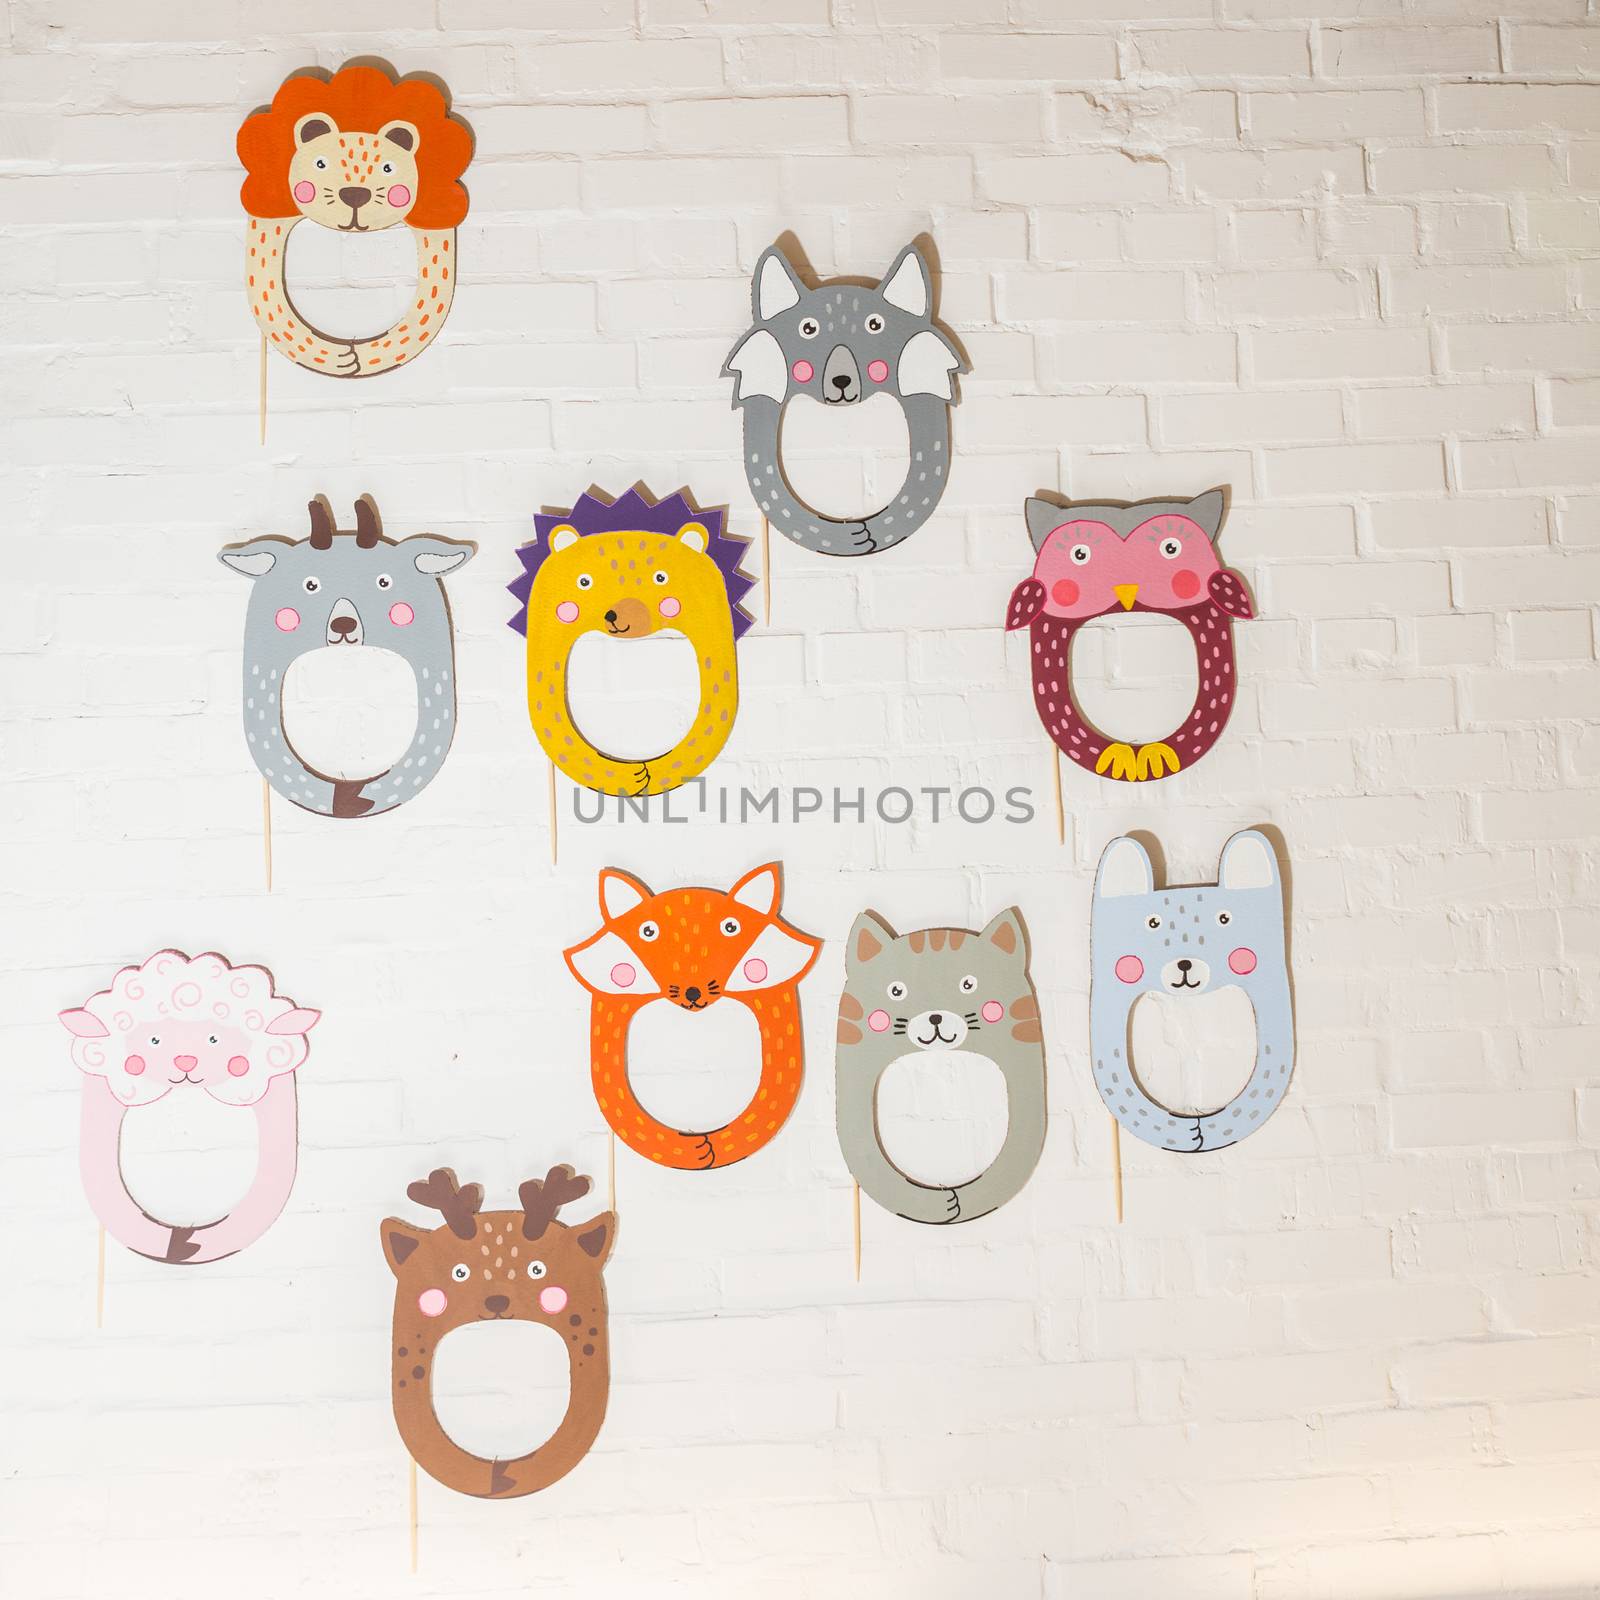 Set of cardboard masks on a white brick wall. Consept card.